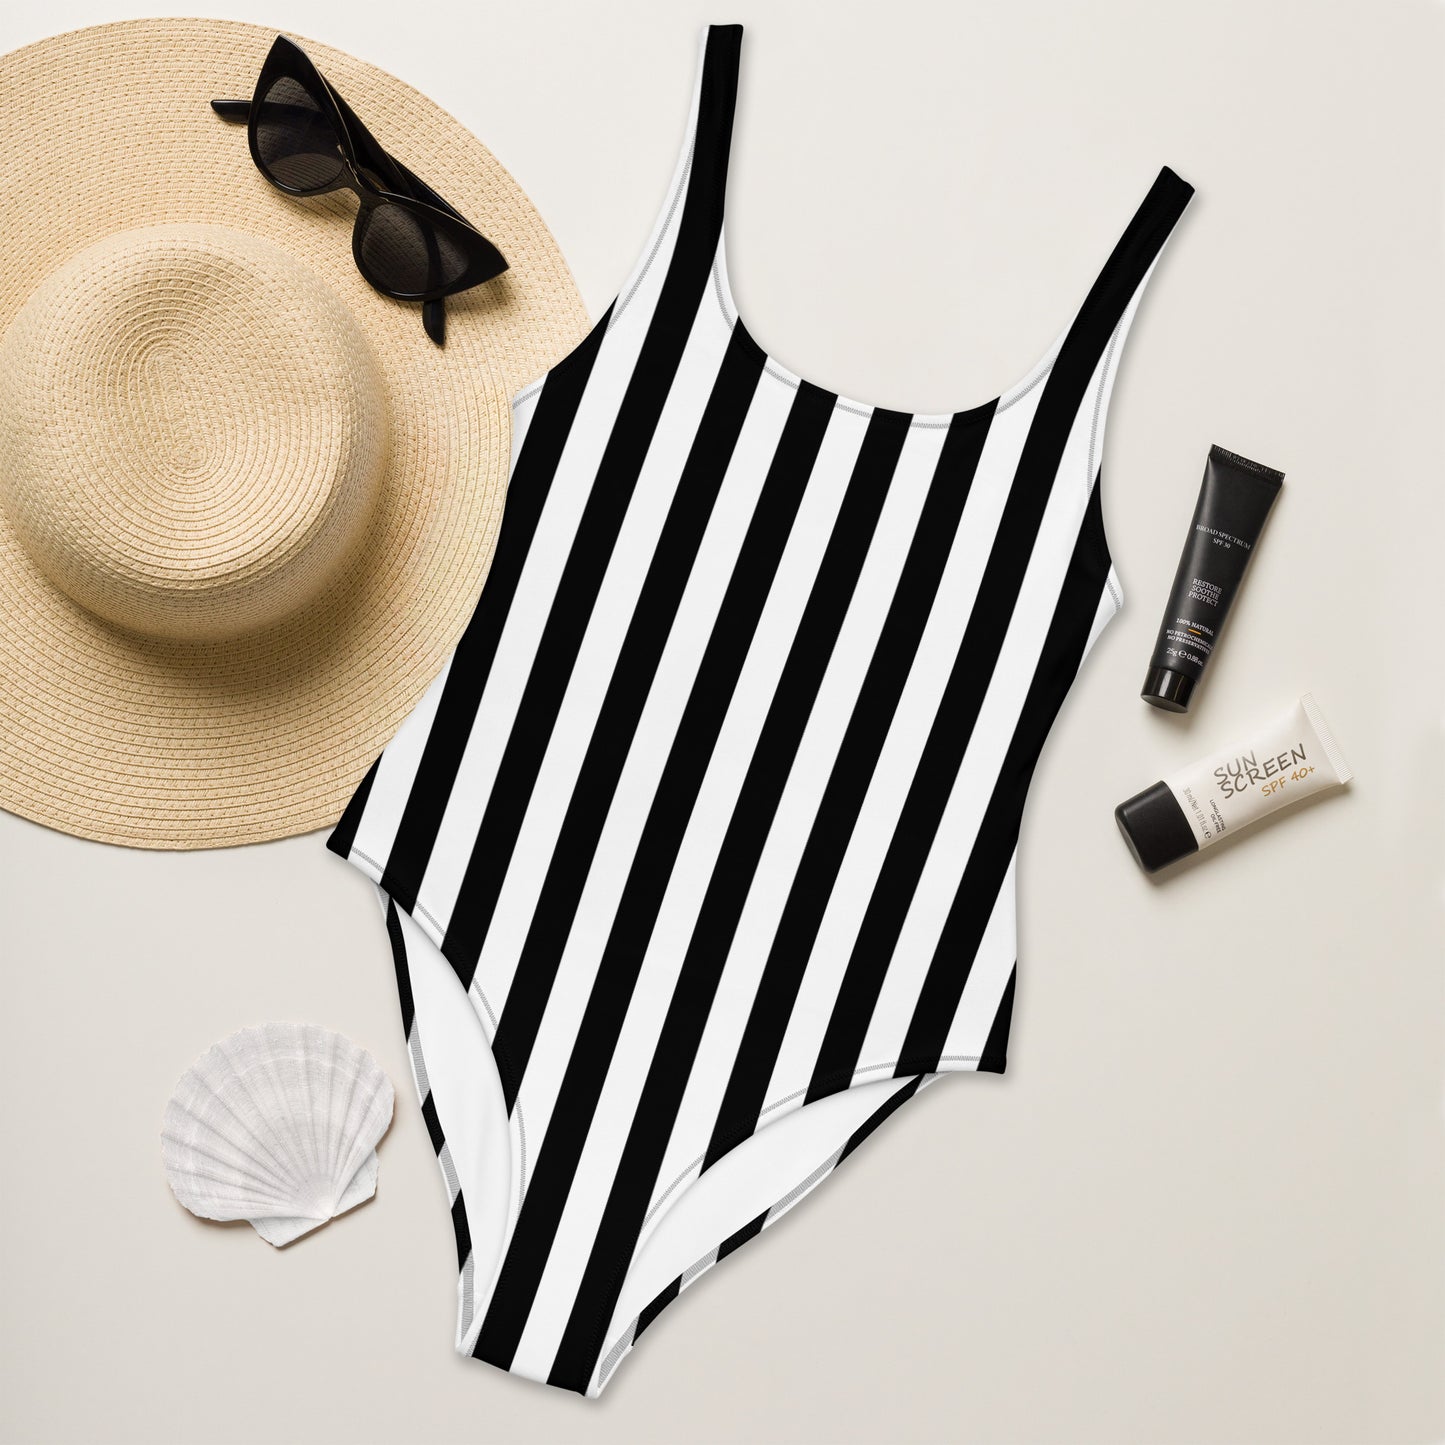 Black and White Stripe One-Piece Swimsuit